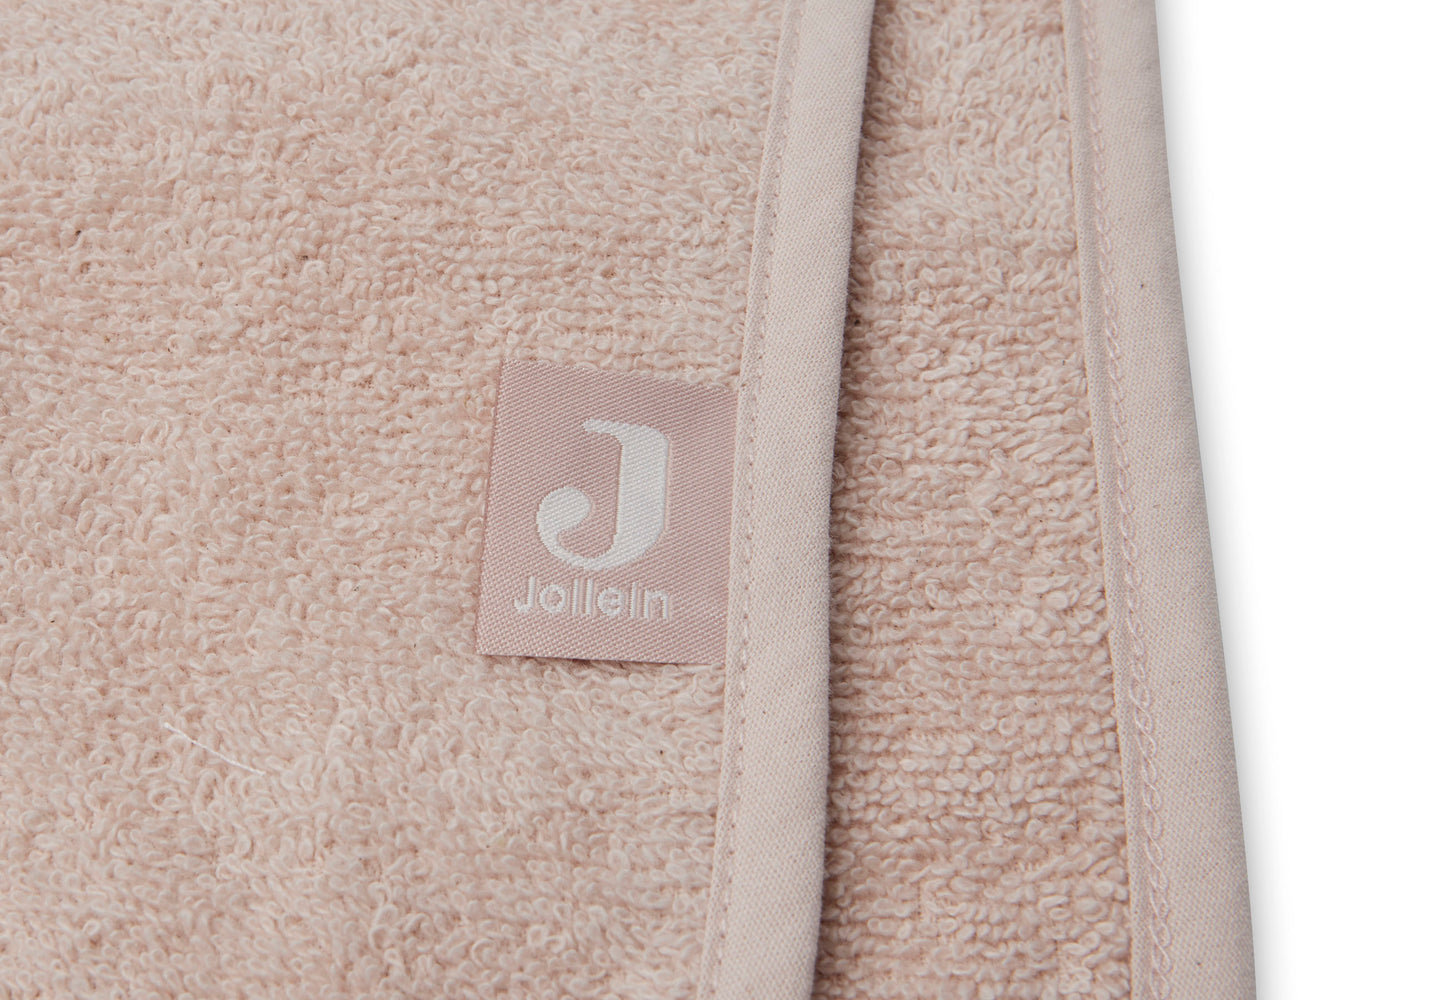 Jollein Badeponcho - Pale Pink